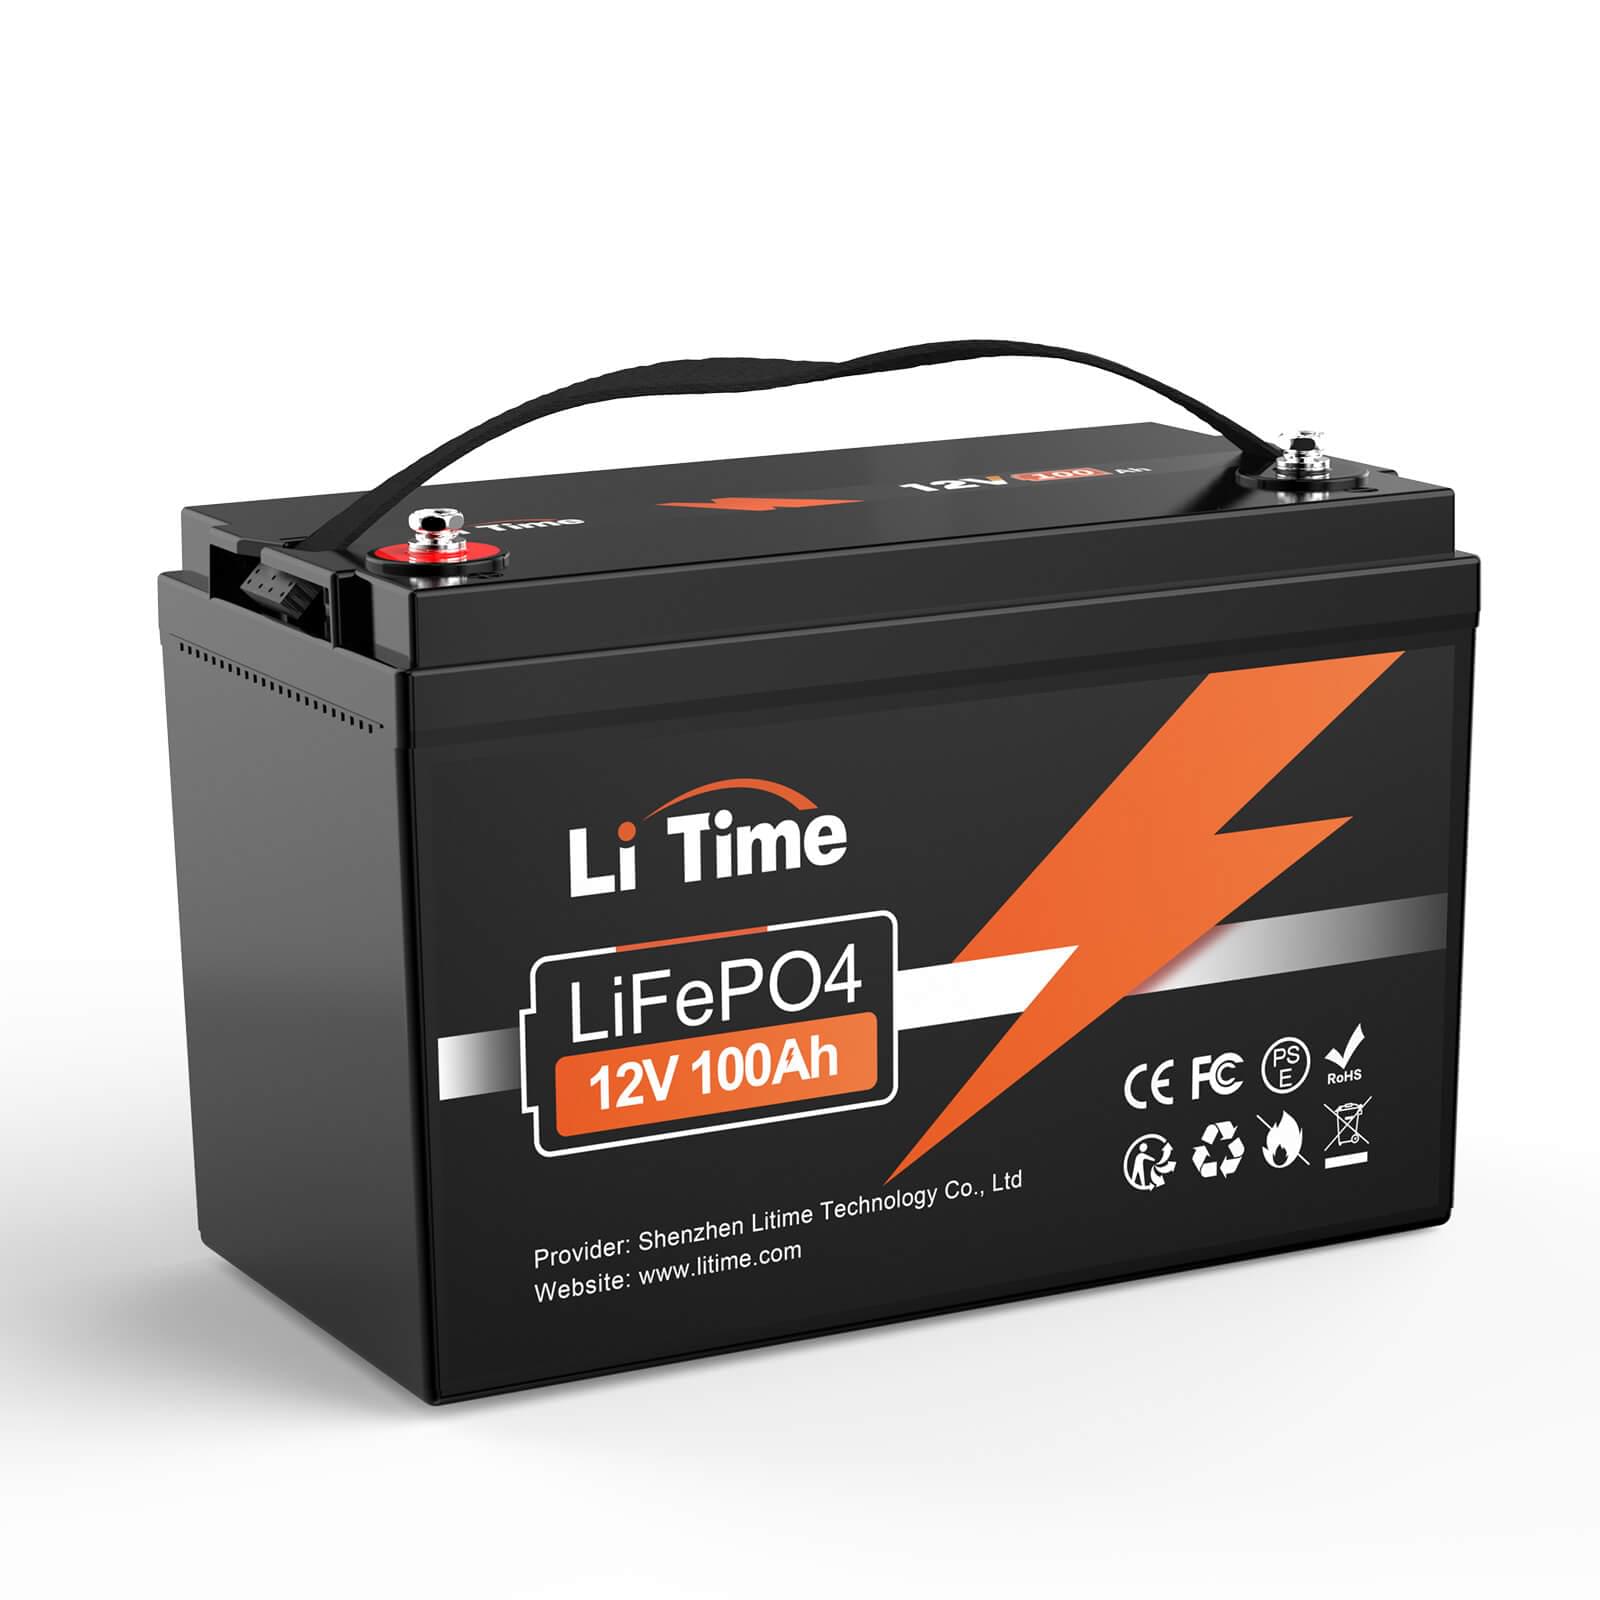 LiTime 12V 100Ah LiFePO4 Lithium Battery, Built-in 100A BMS, 1280Wh Energy